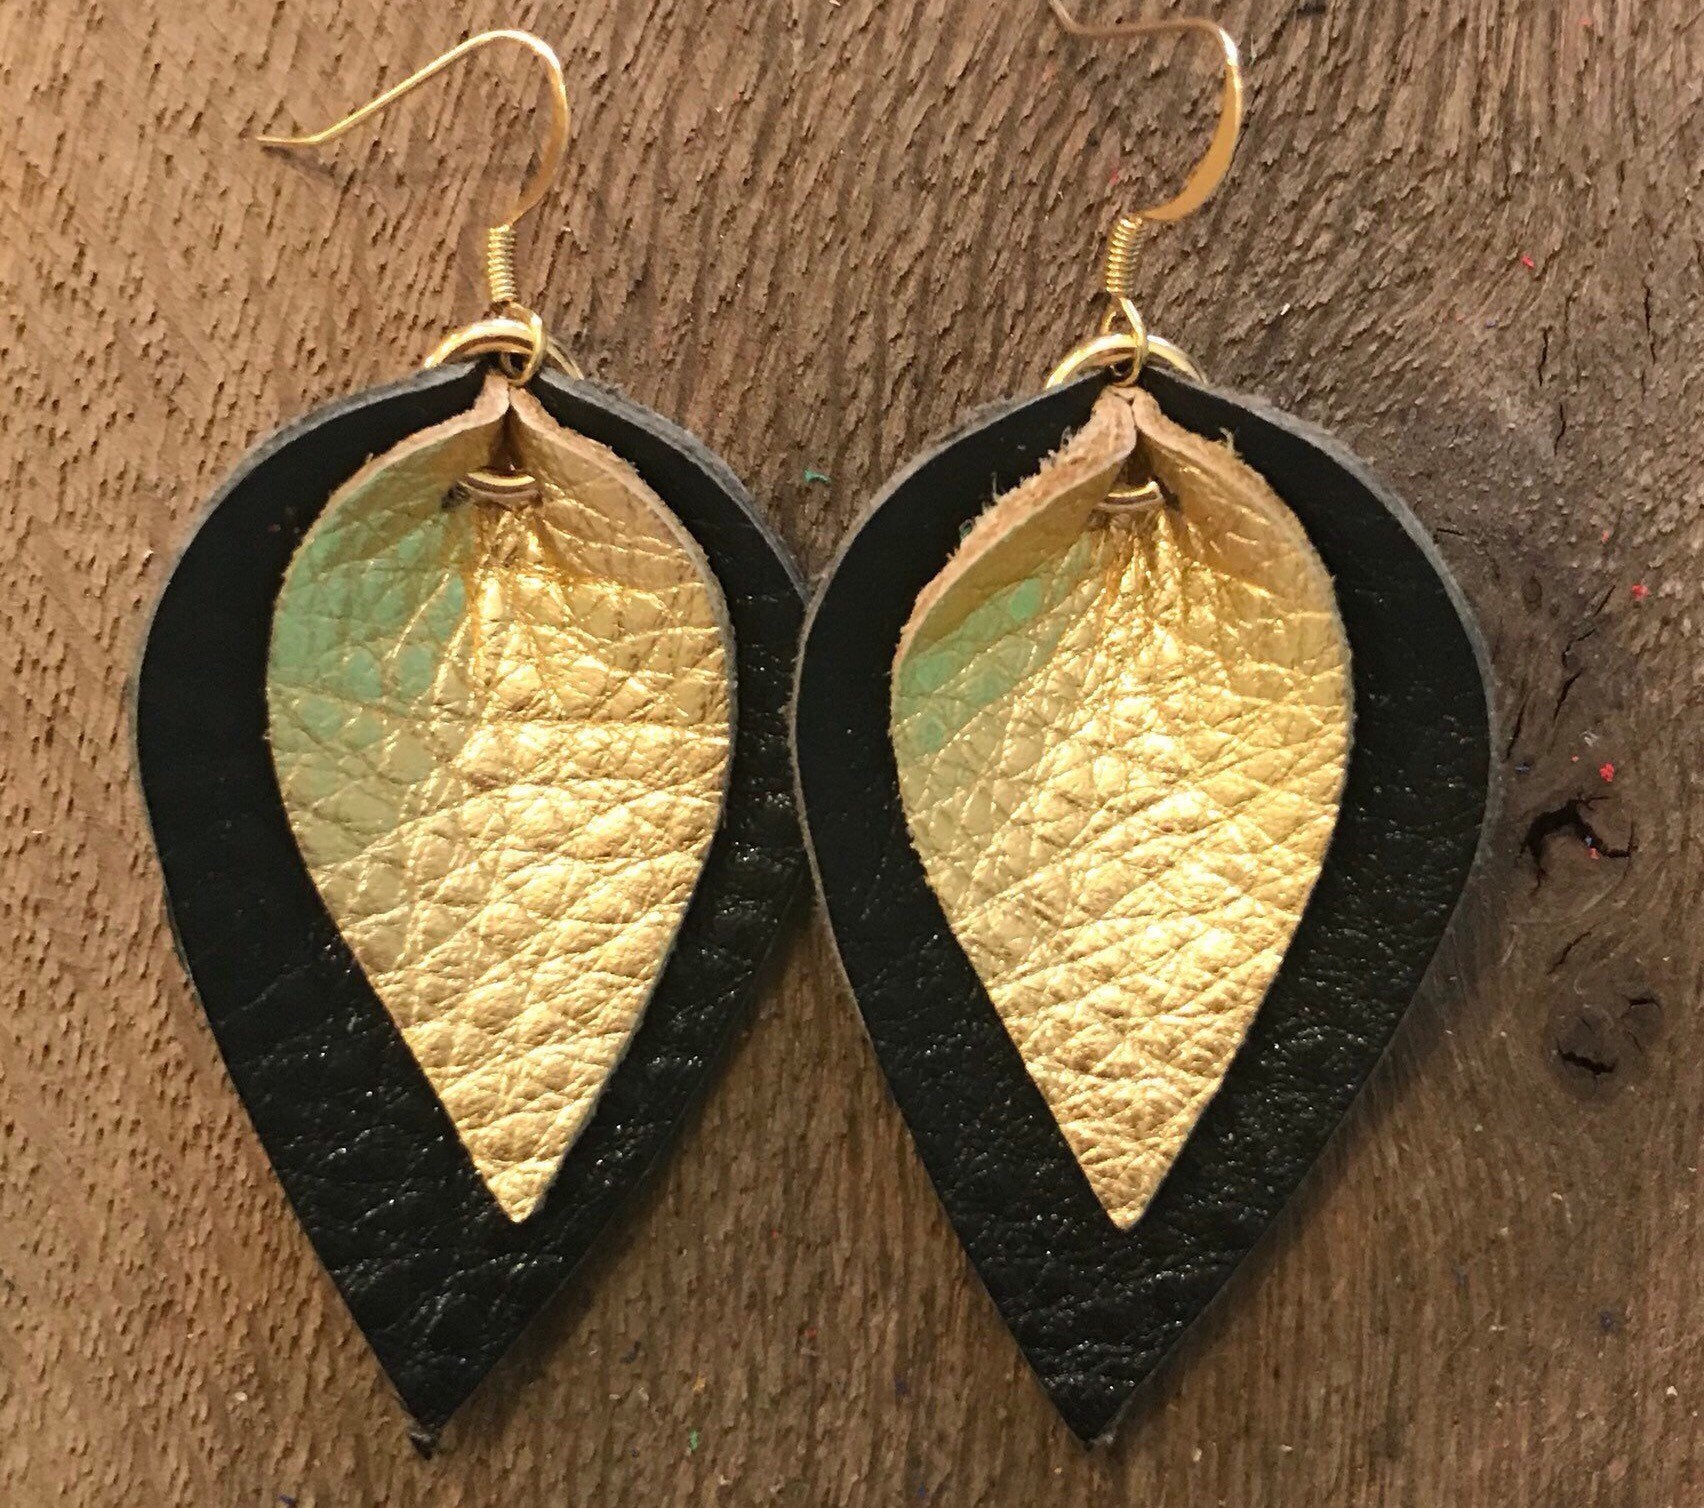 Katie - Double Layered Leather Leaf Shaped Earrings in Black and Metal ...